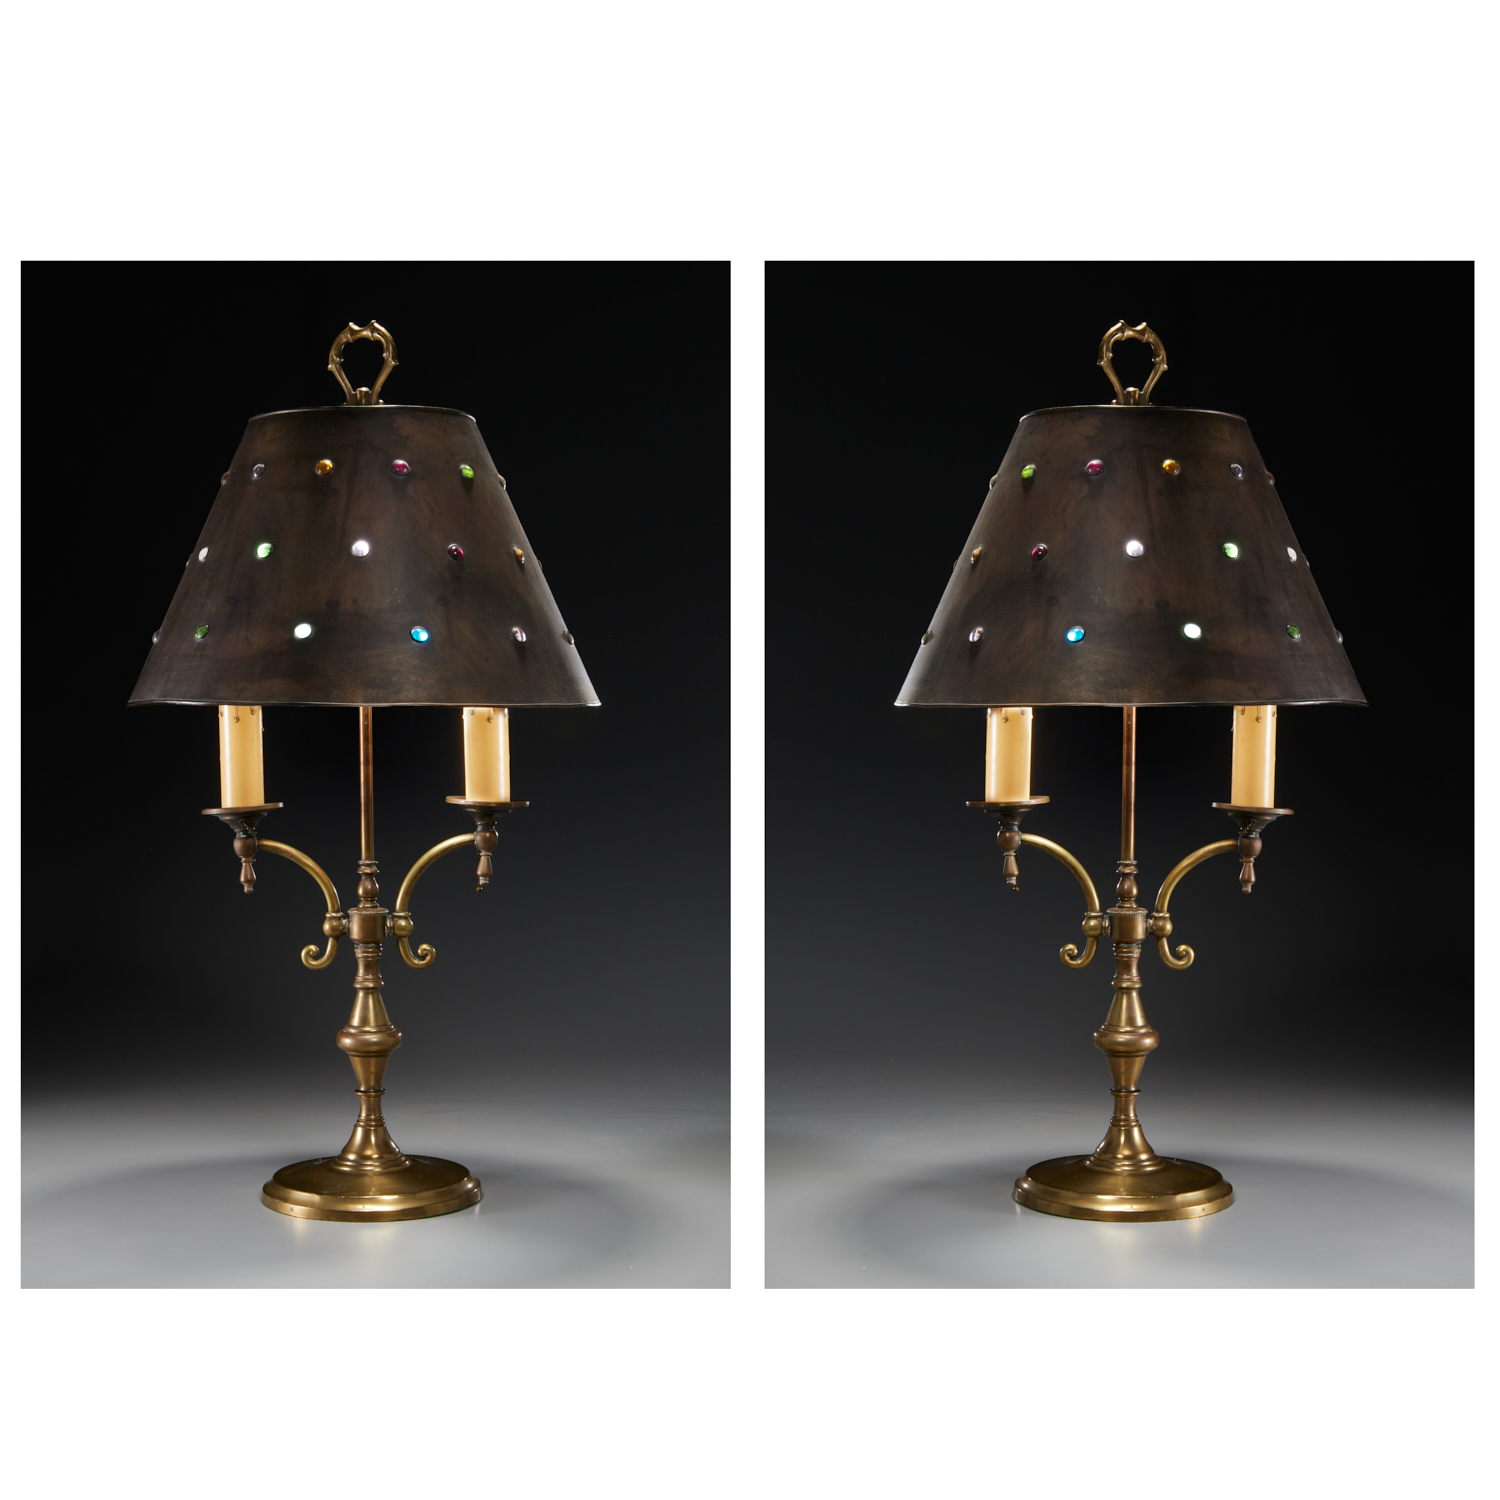 CHIC PAIR CANDELABRA LAMPS JEWELED 360c37